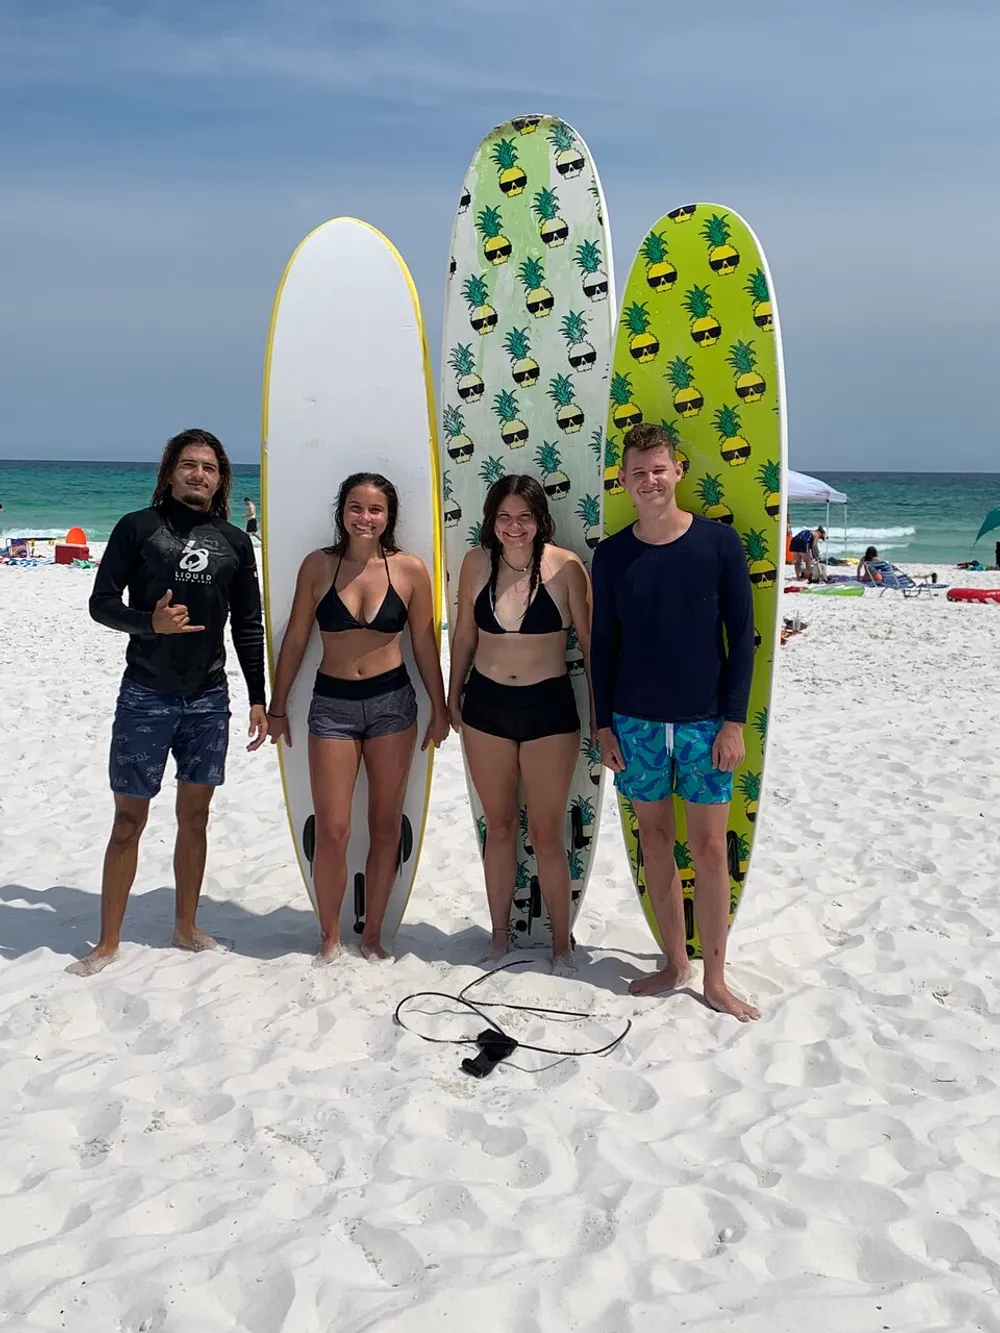 Four people are standing on a sandy beach holding surfboards with the ocean in the background